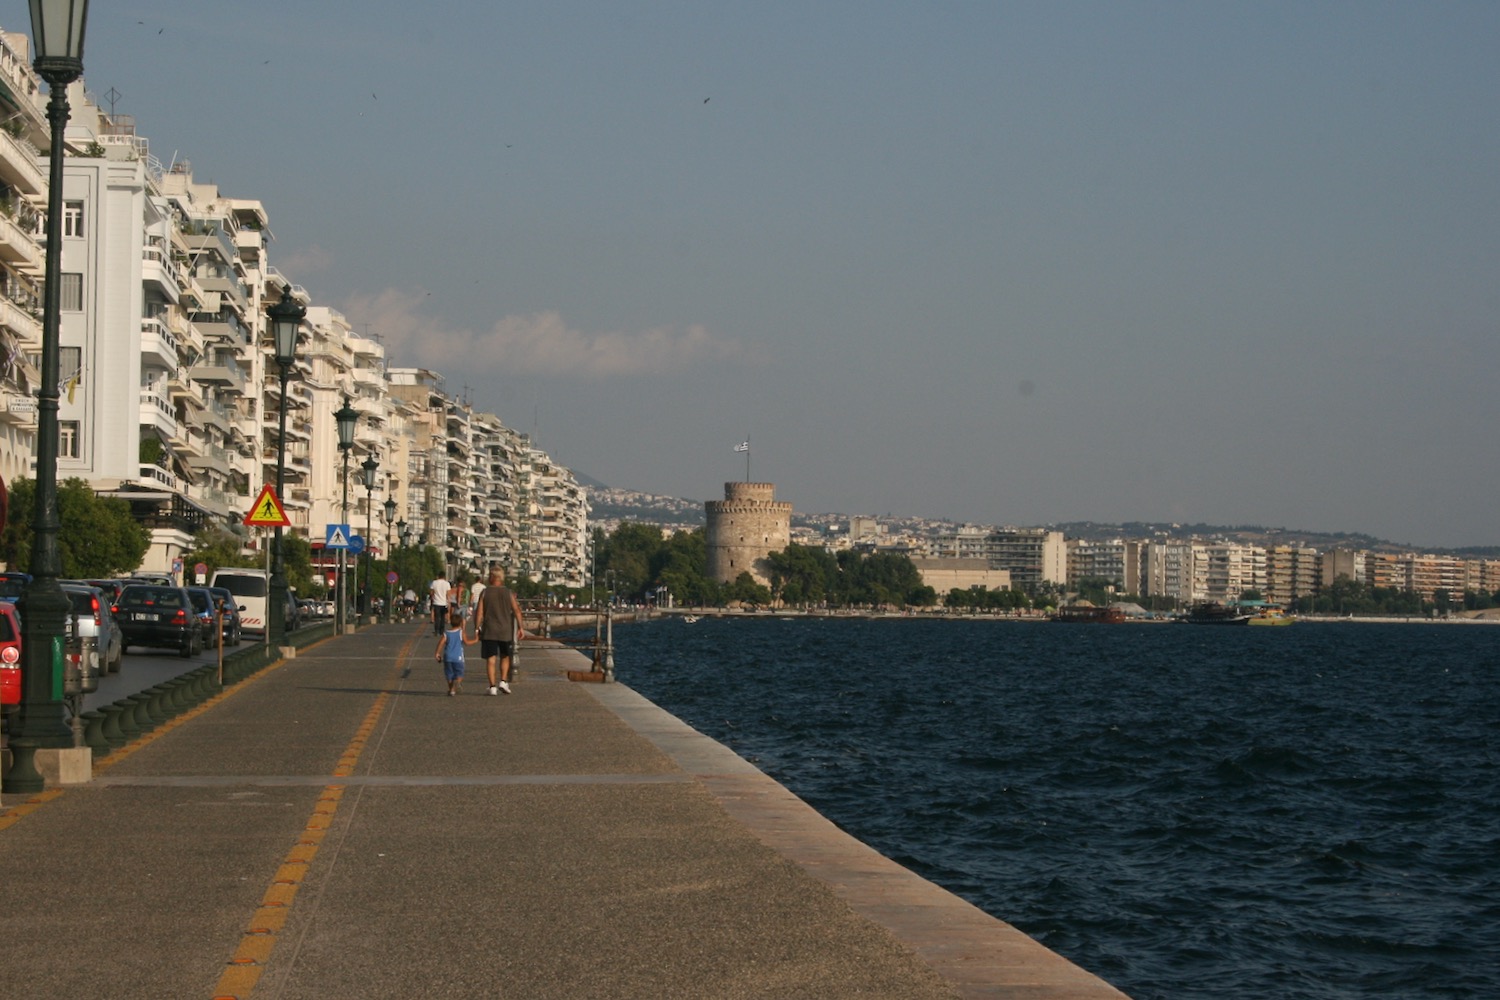 a sidewalk next to a body of water with Thessaloniki in the background